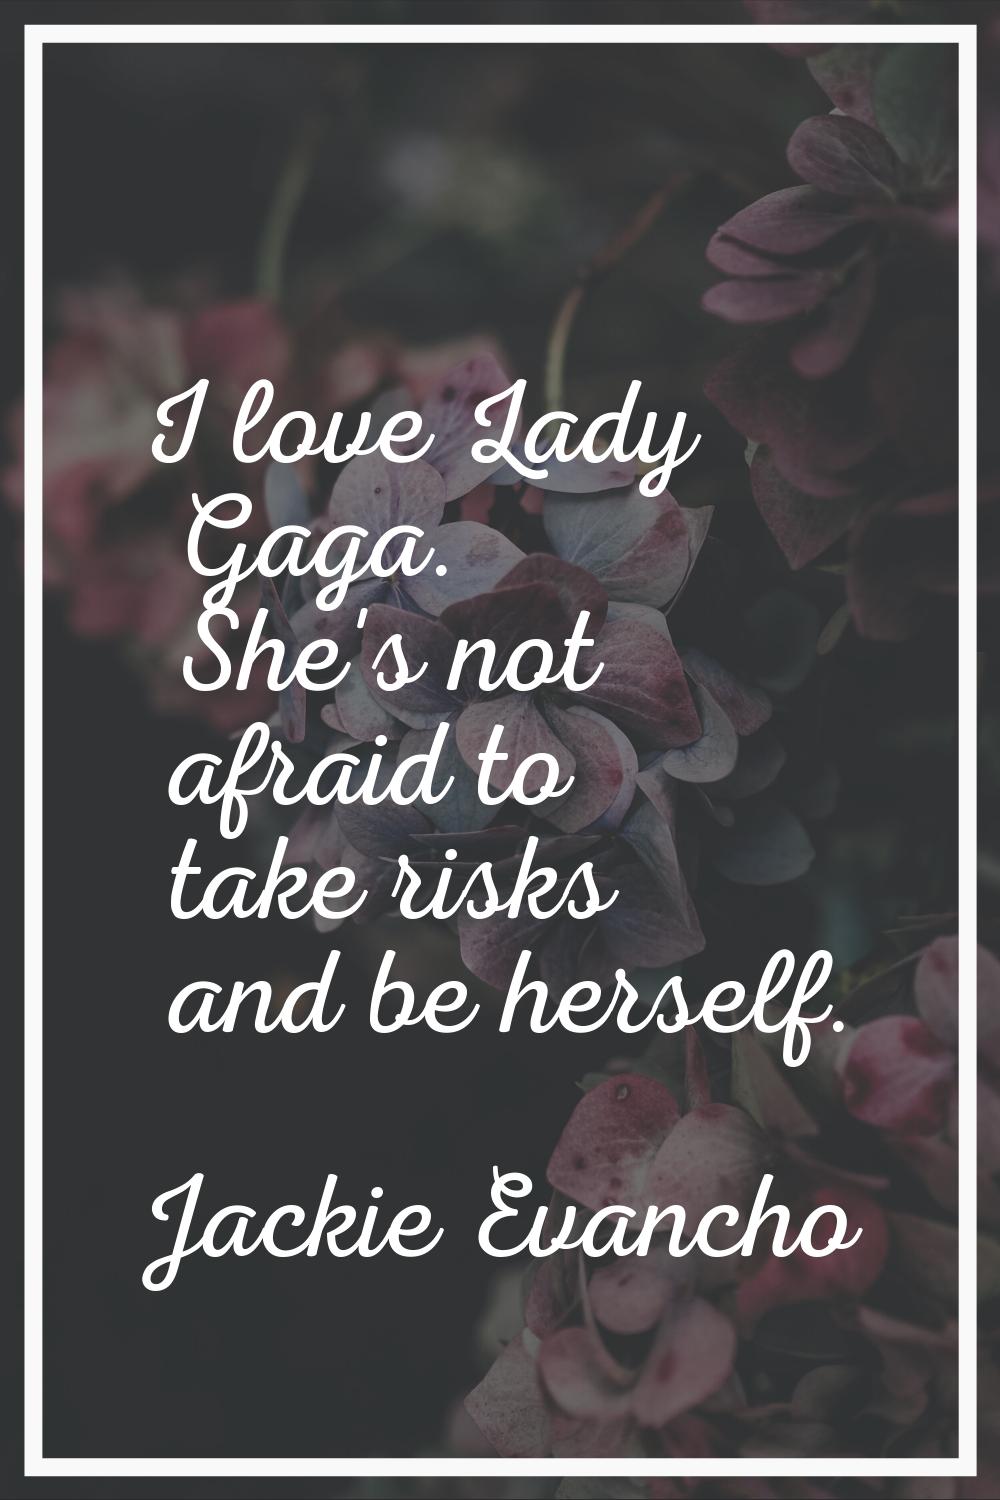 I love Lady Gaga. She's not afraid to take risks and be herself.